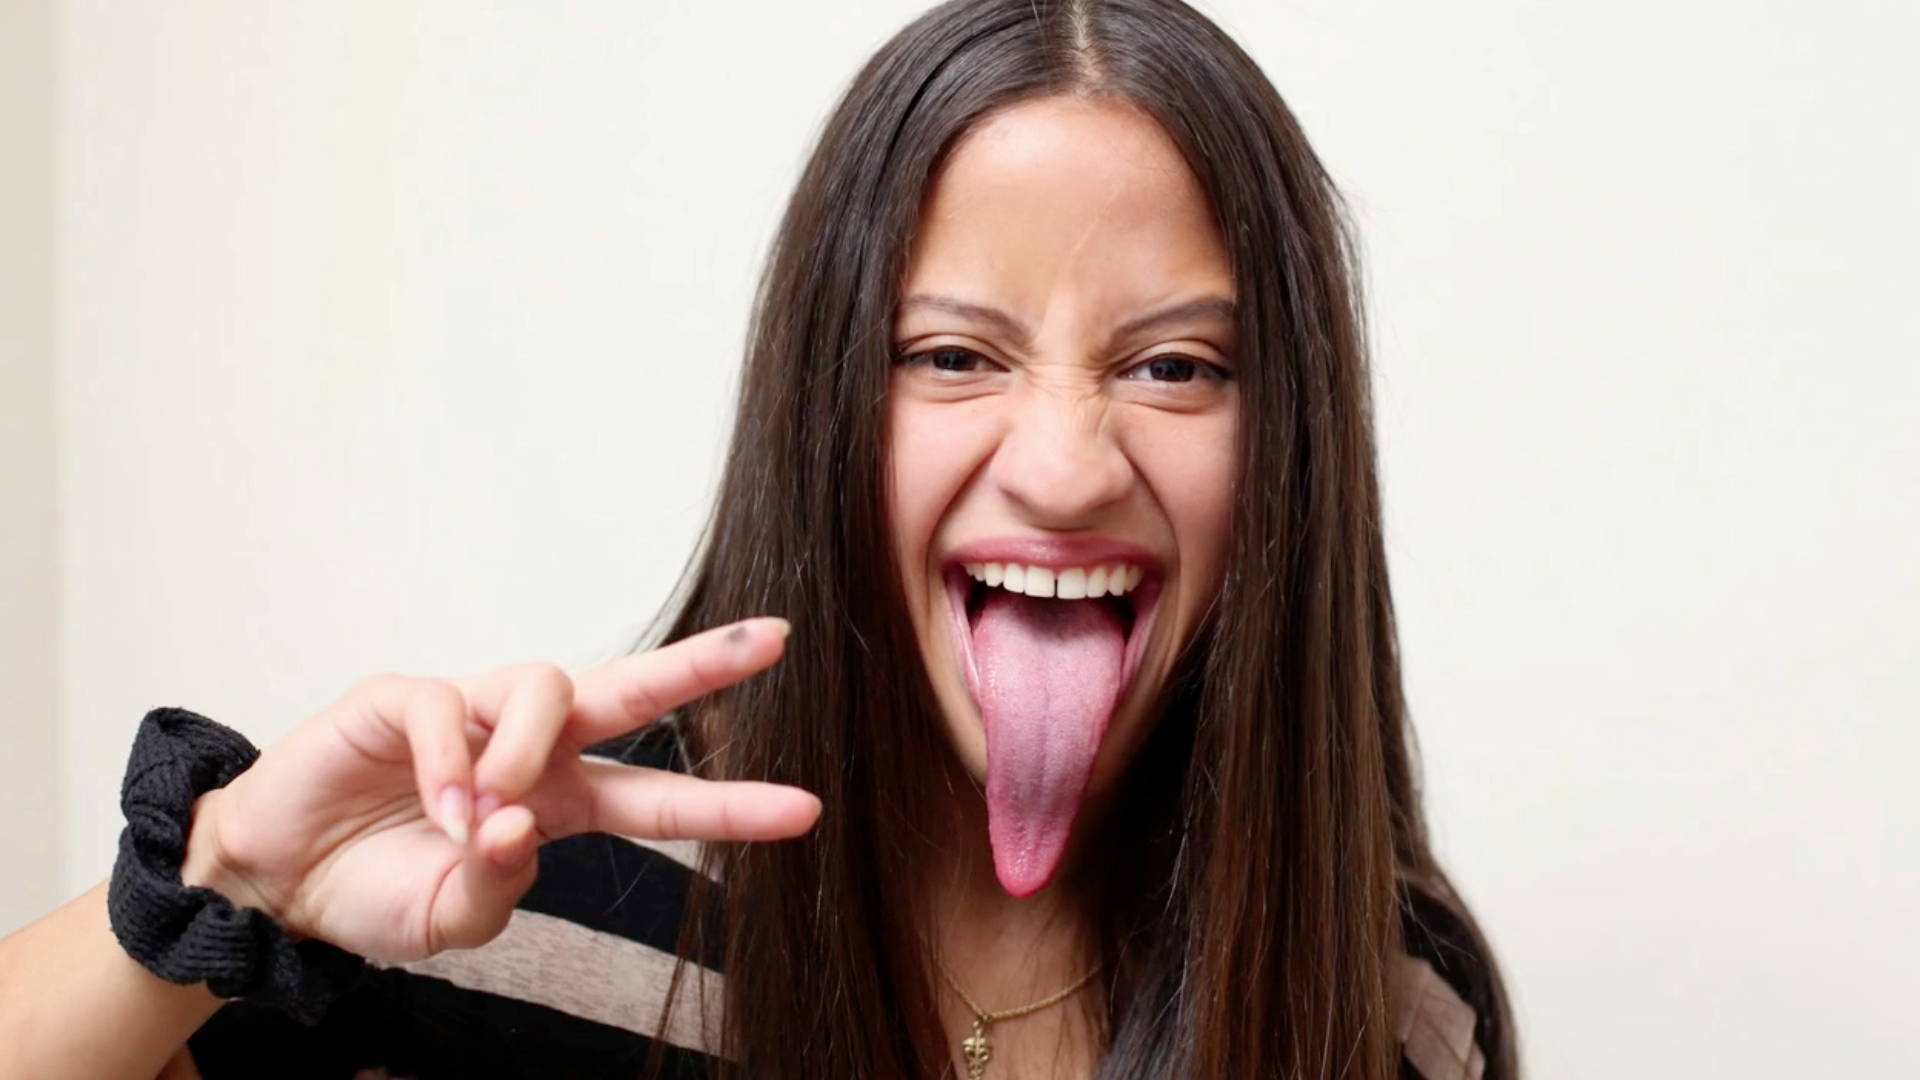 Longest Tongue To Lick Pussy - Long Tongue Face Licking - Free Sex Photos, Hot XXX Images ...